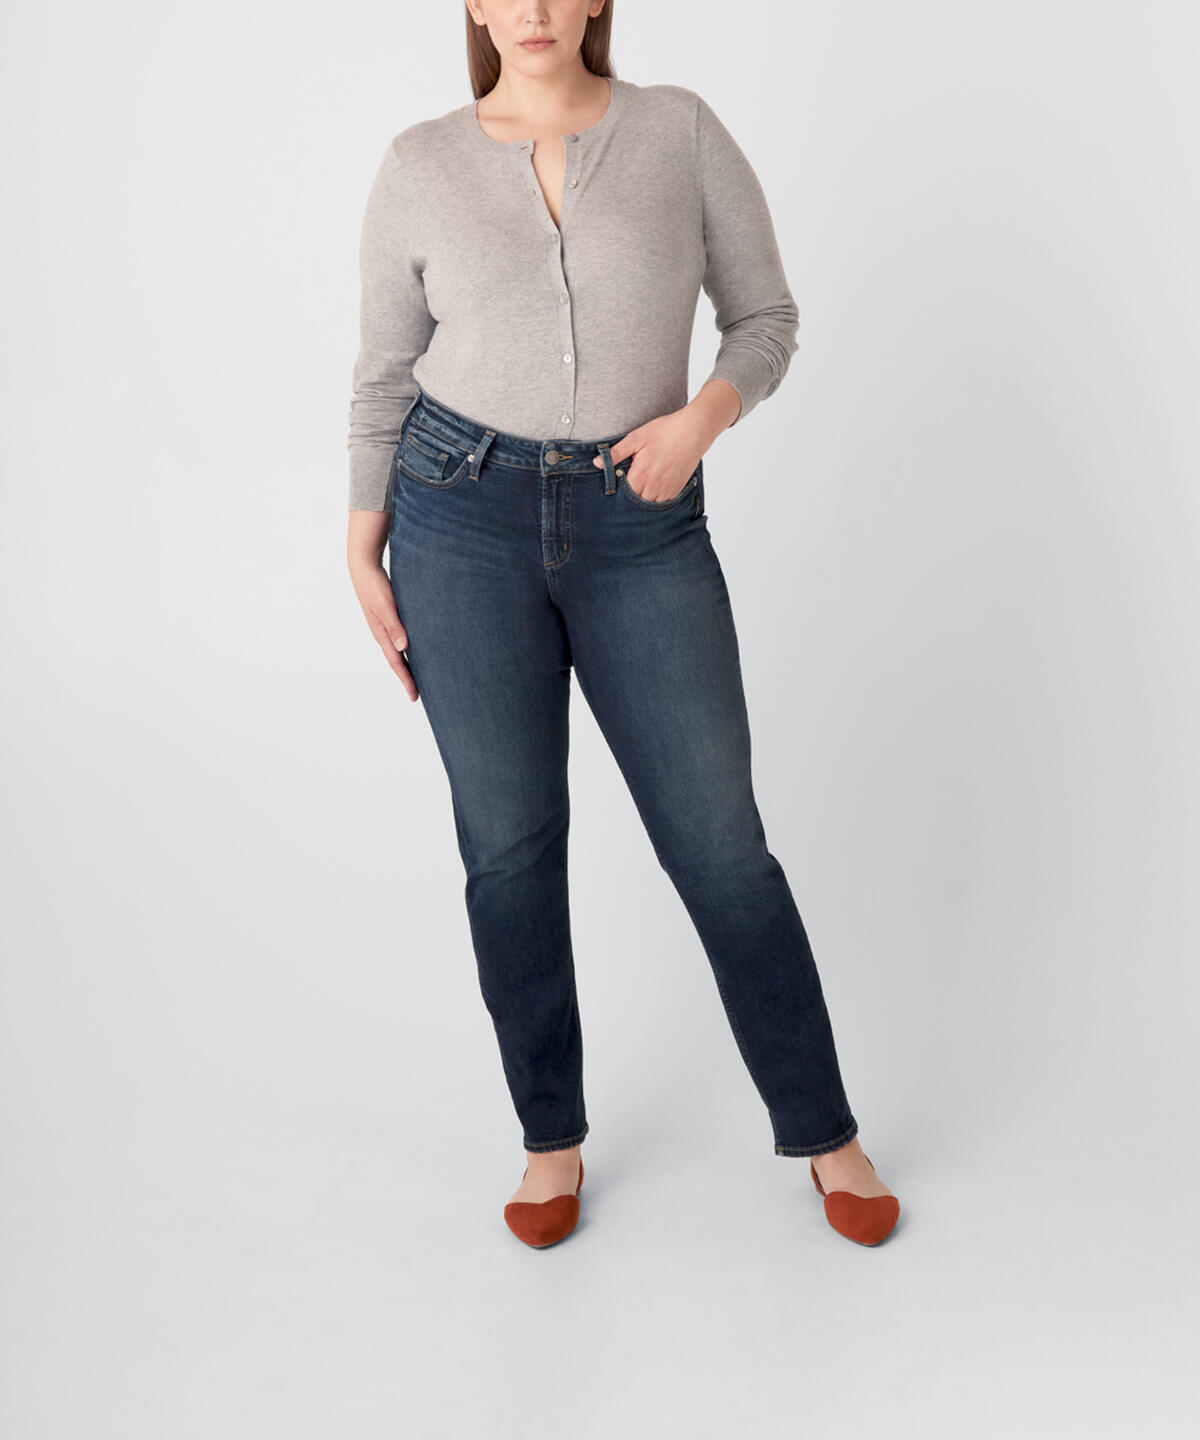 Avery High Rise Straight Leg Jeans Plus Size, , hi-res image number 0